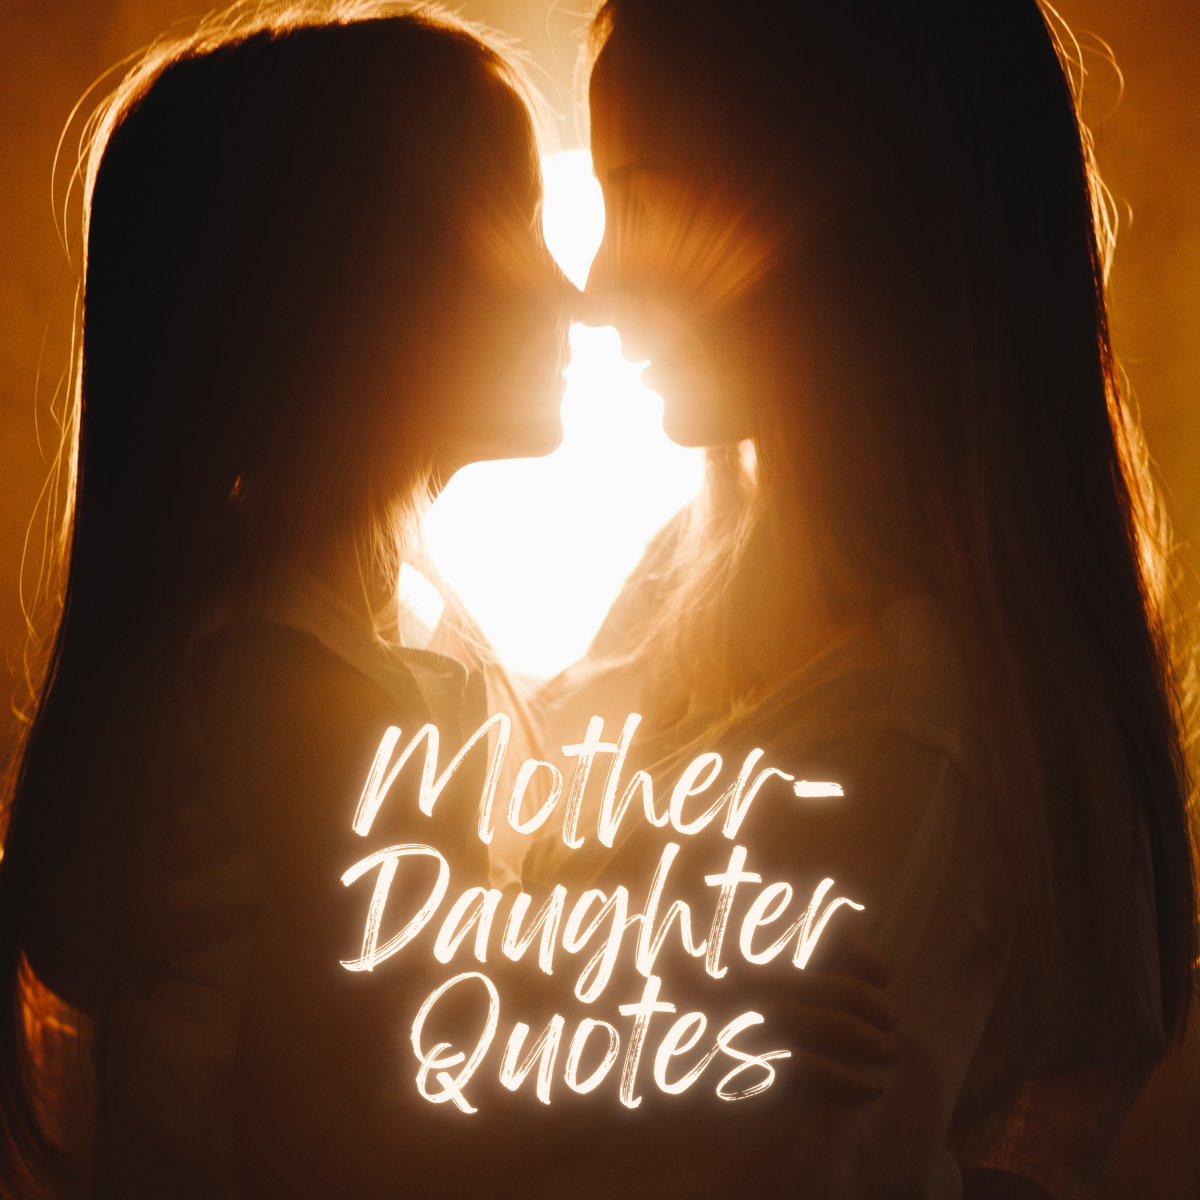 A list of quotes about mothers and daughters.